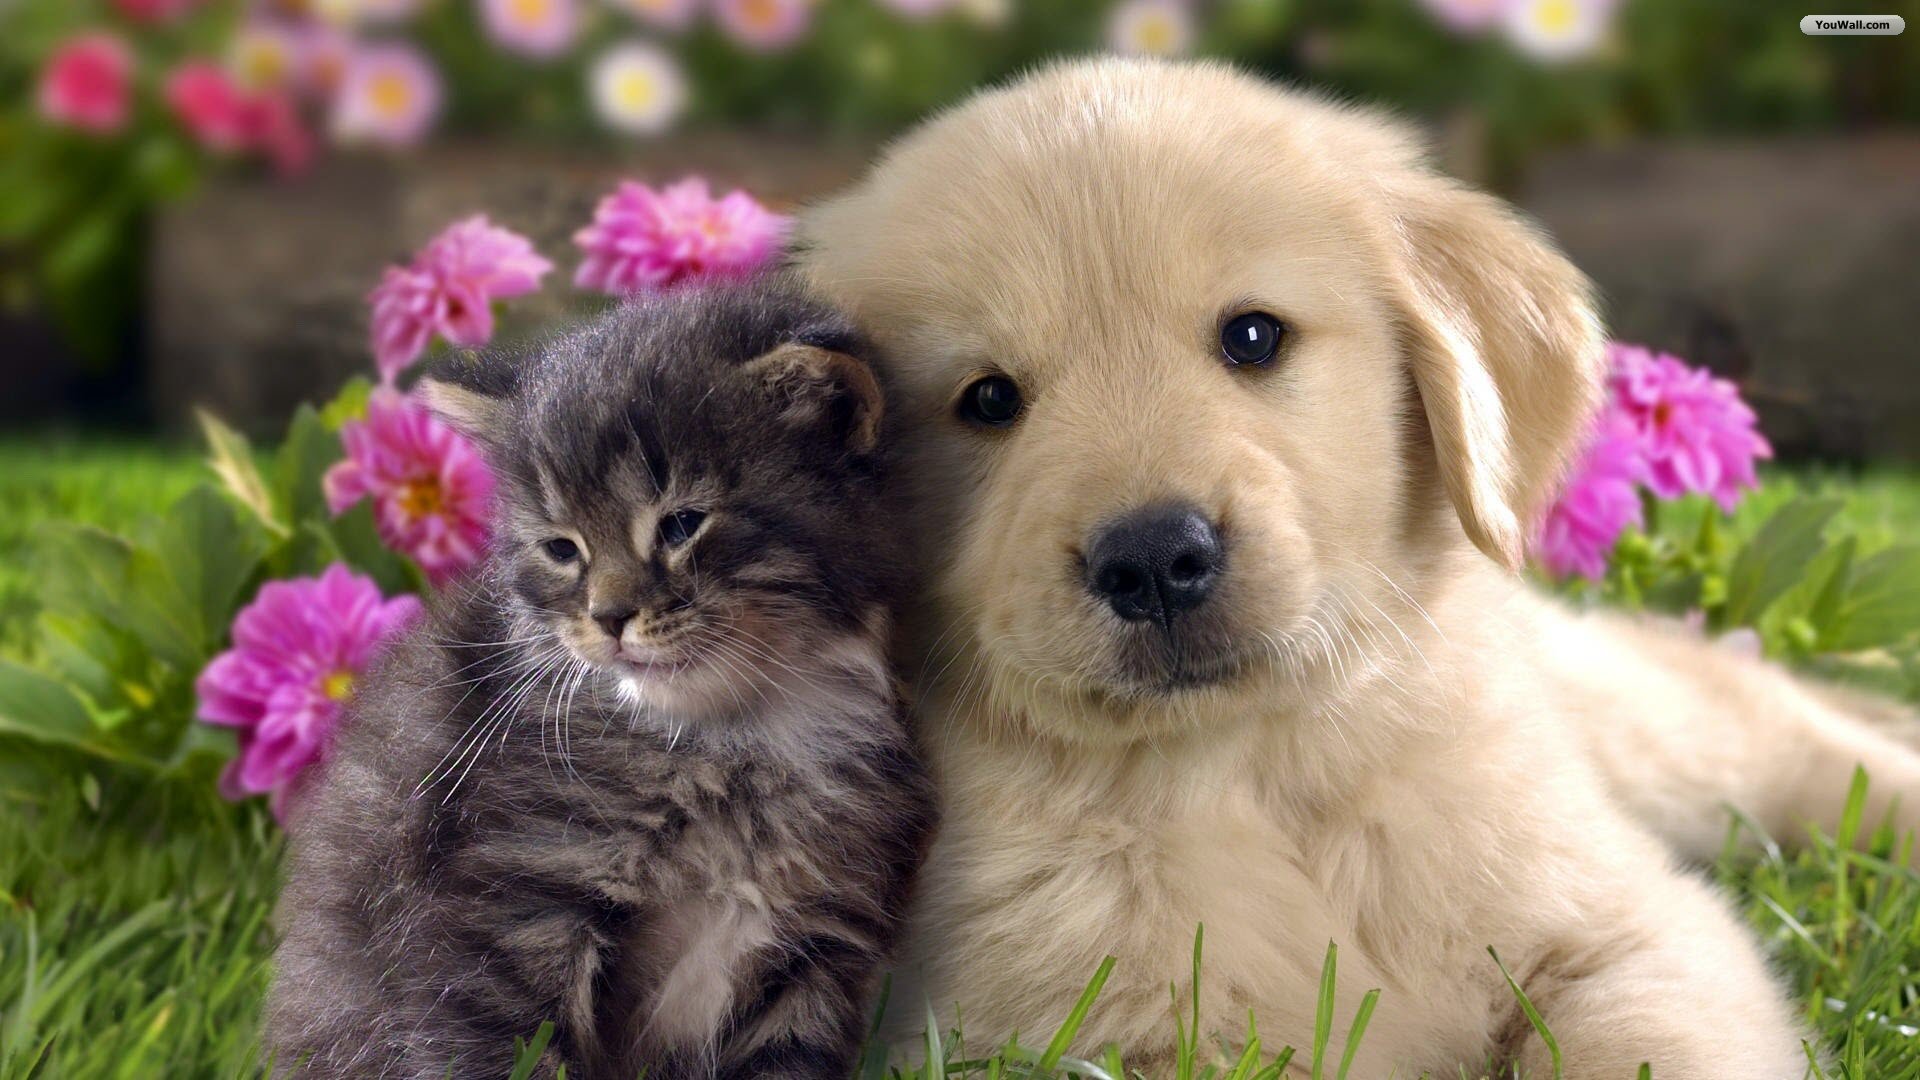 Wallpaper Image Image Cats Dogs